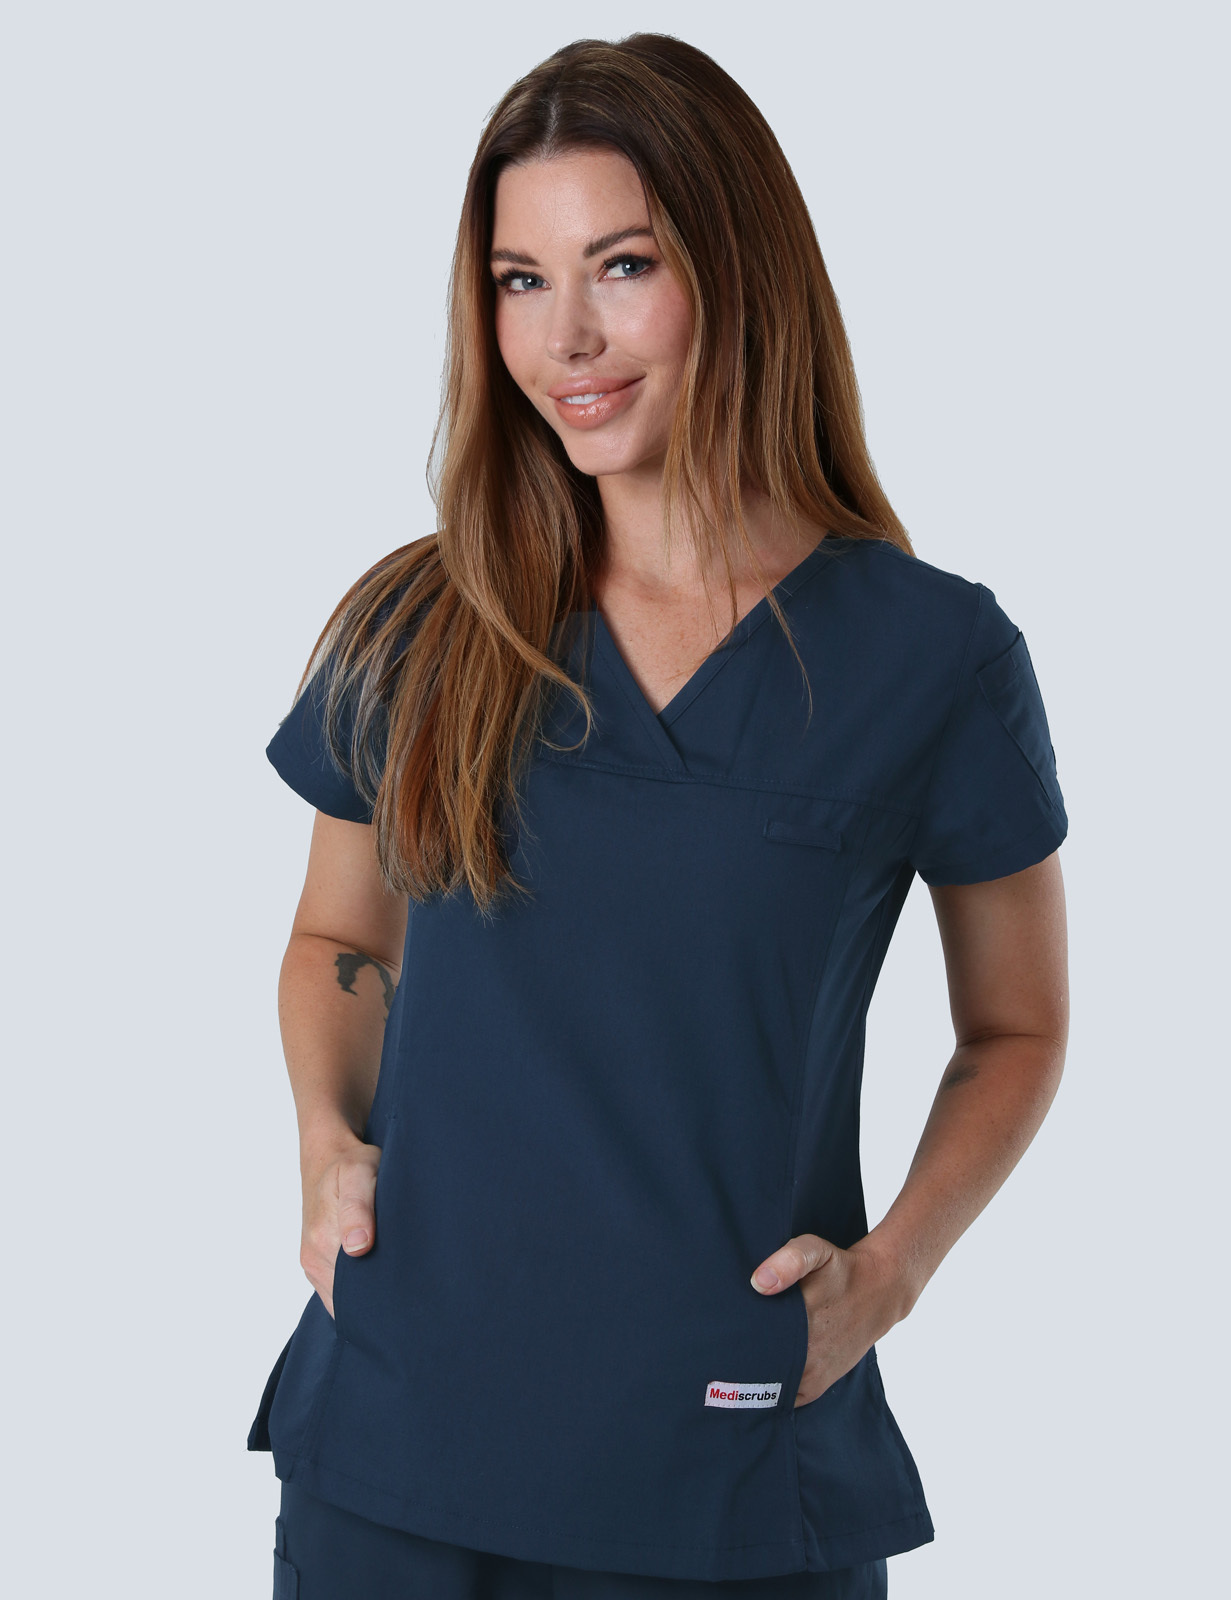 Women's Fit Solid Scrub Top - Navy - 4X large